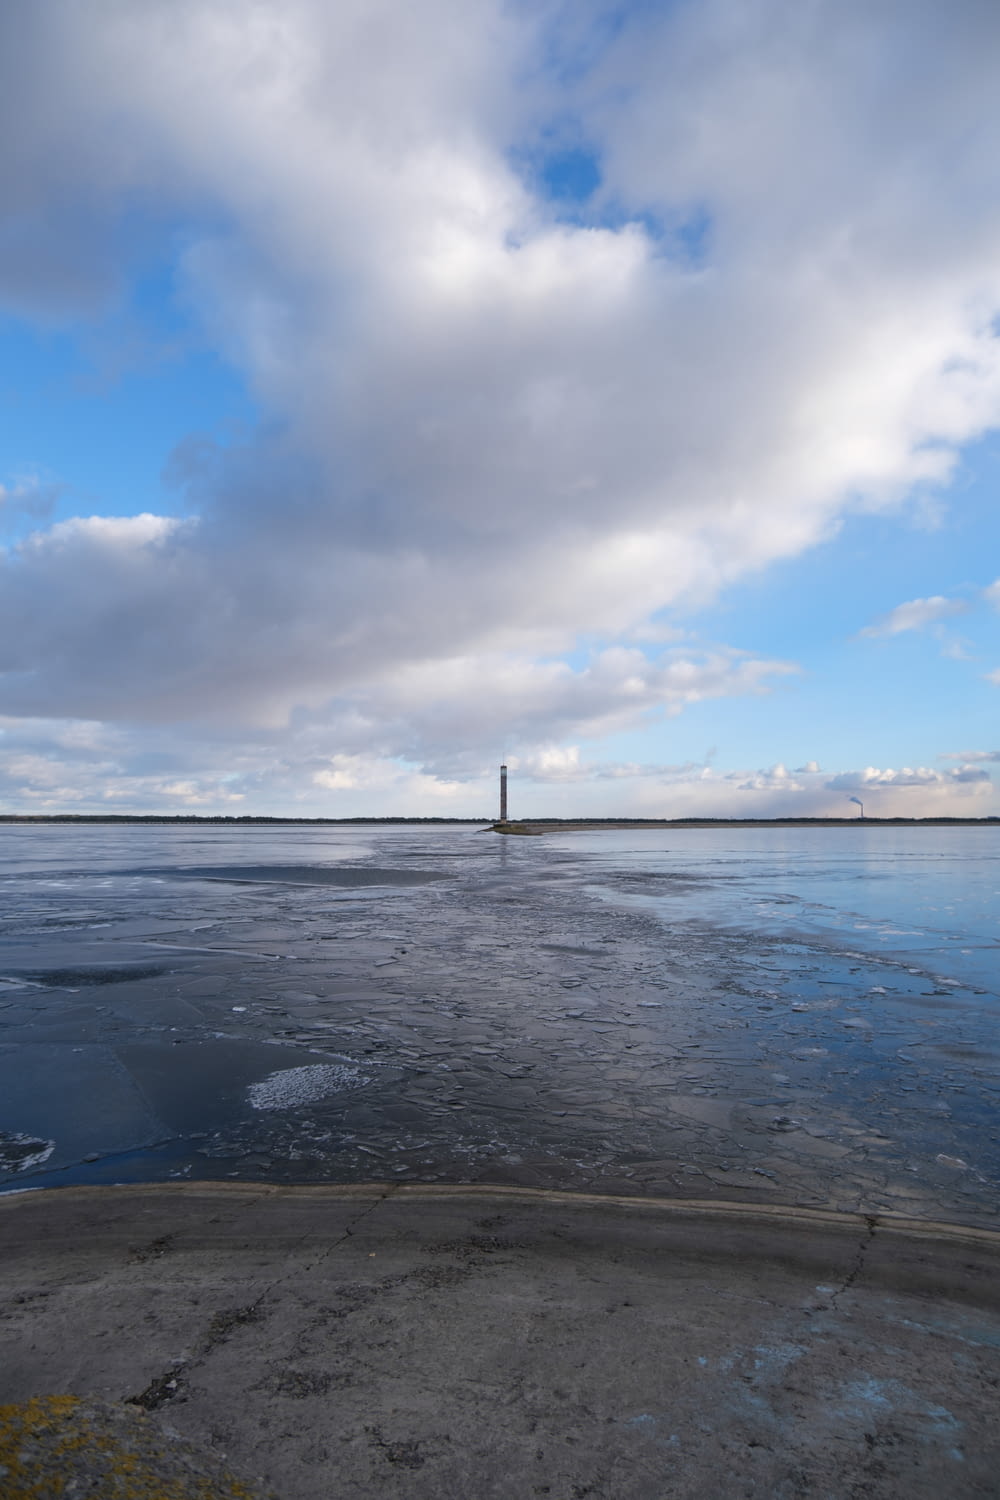 a body of water with a light house in the distance